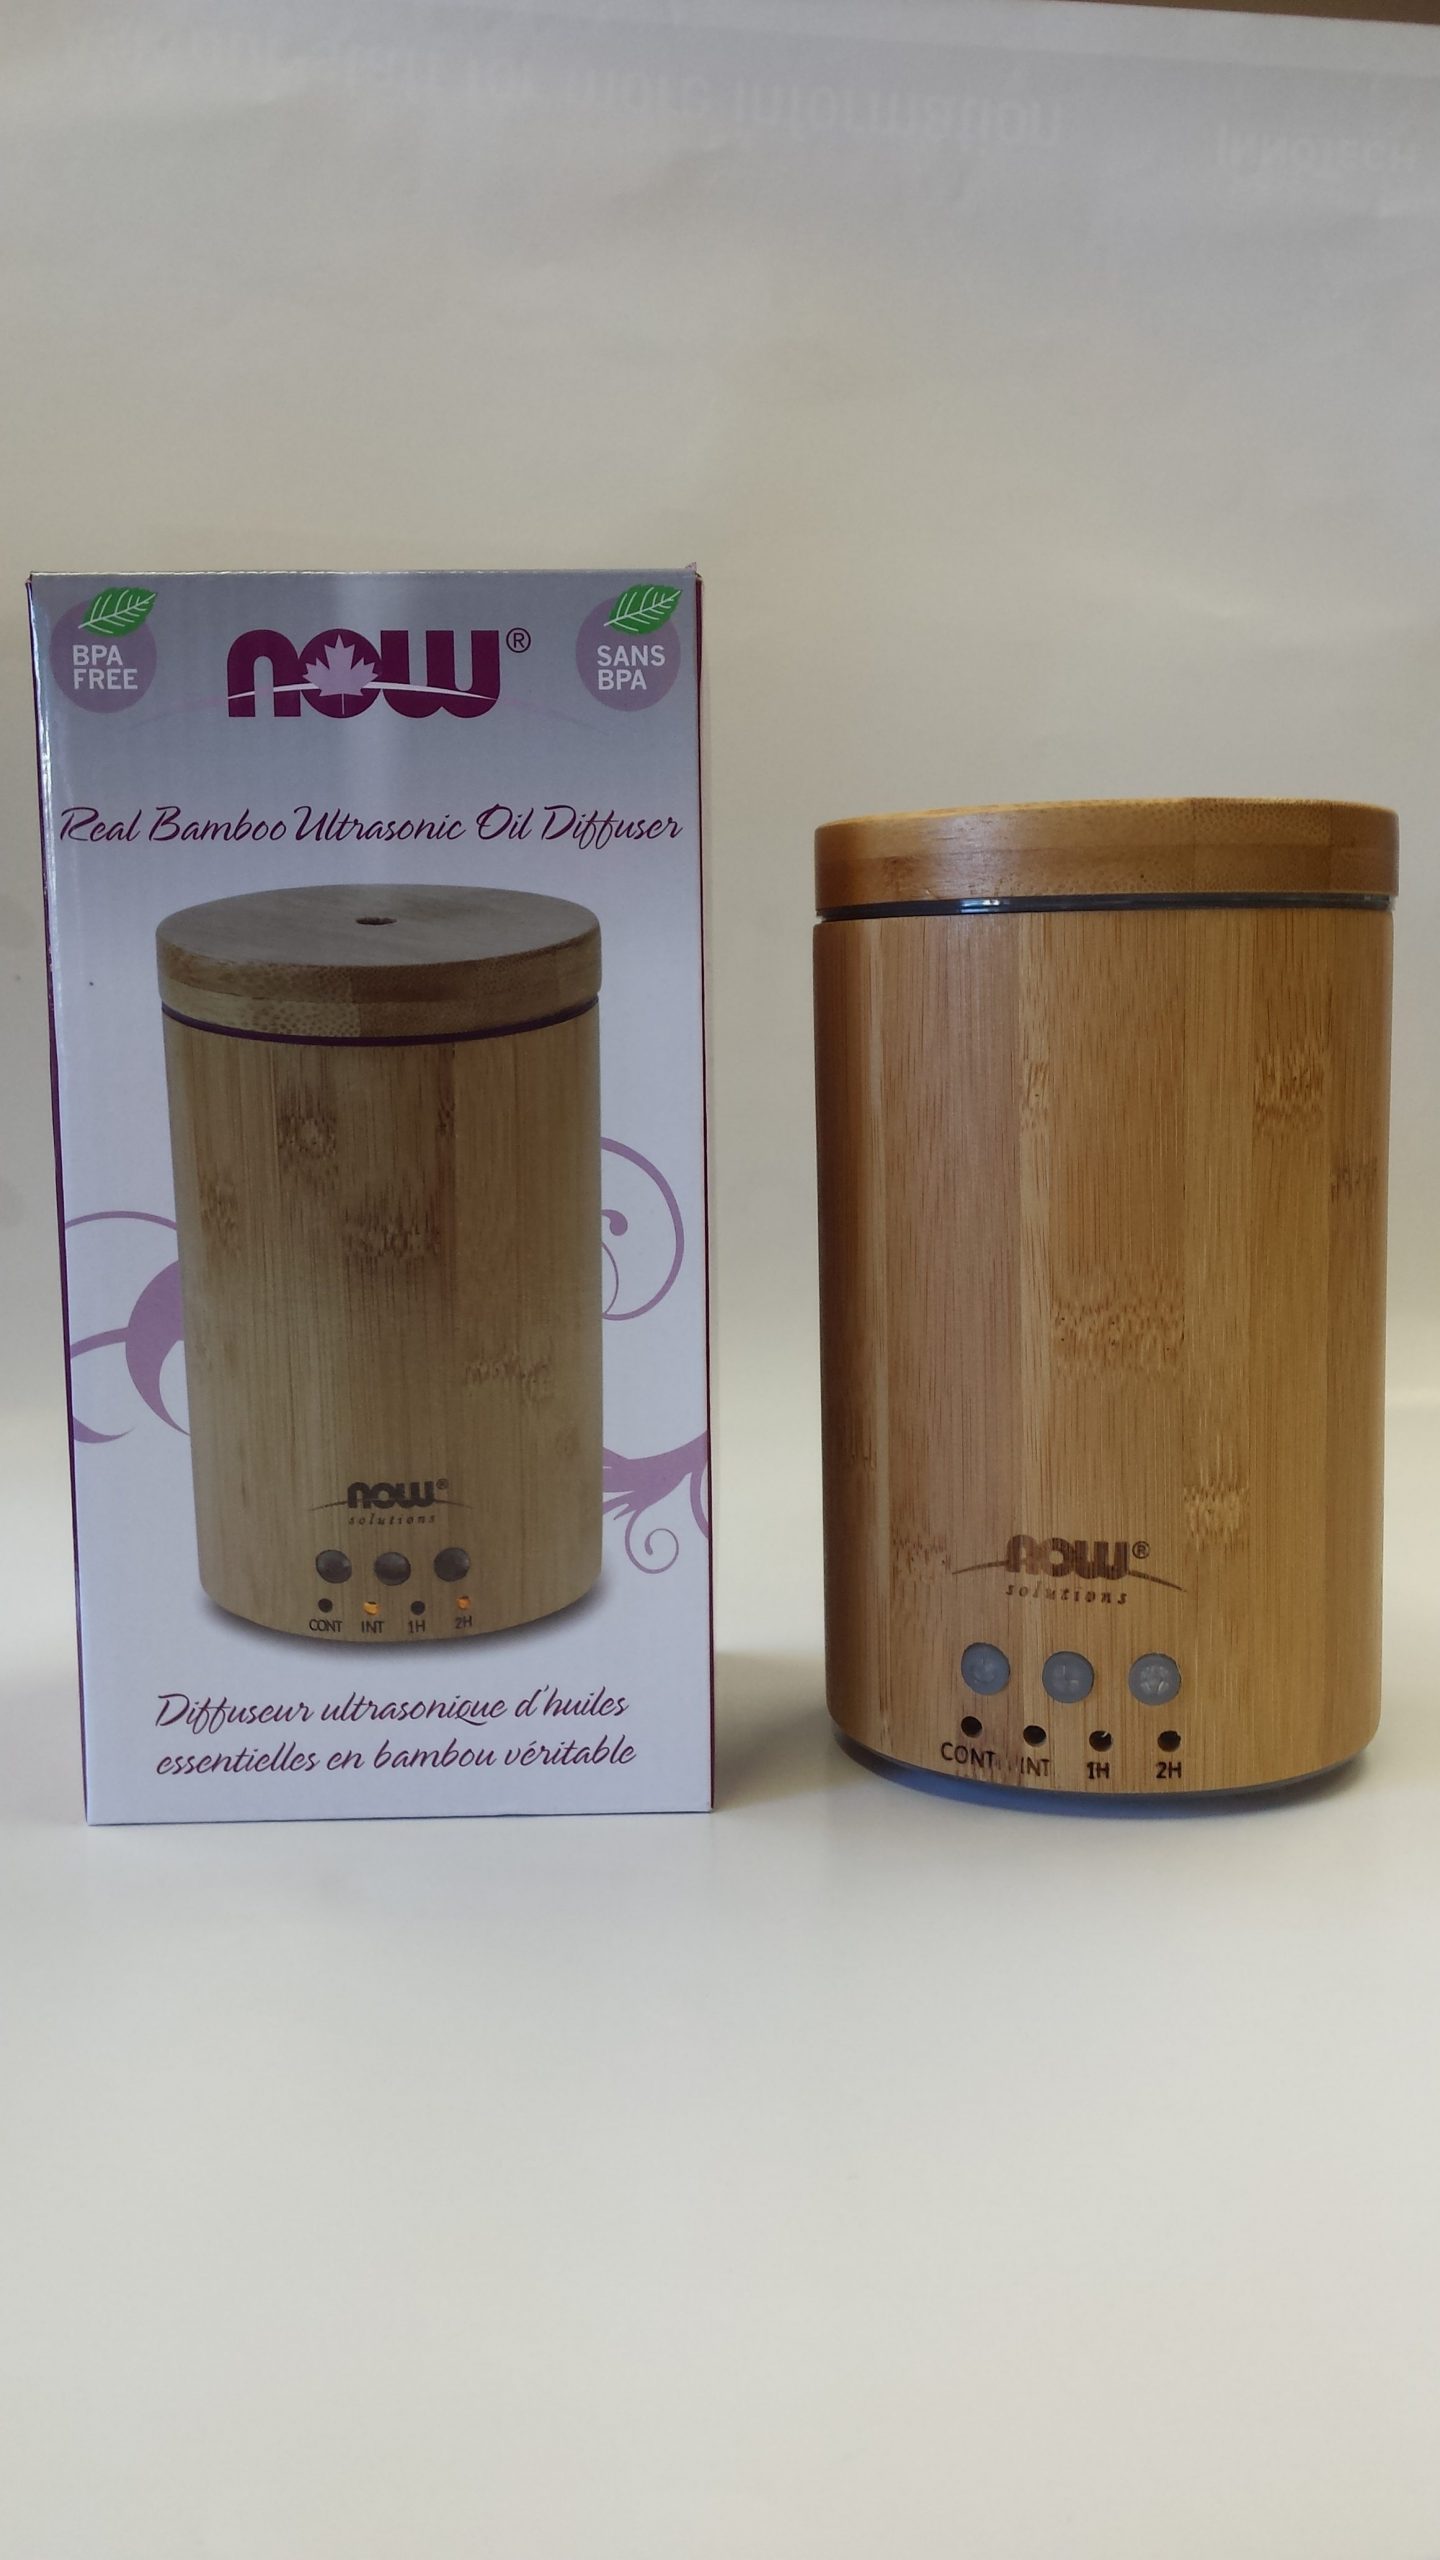 A Real Bamboo Ultrasonic Oil Diffuser Total Health